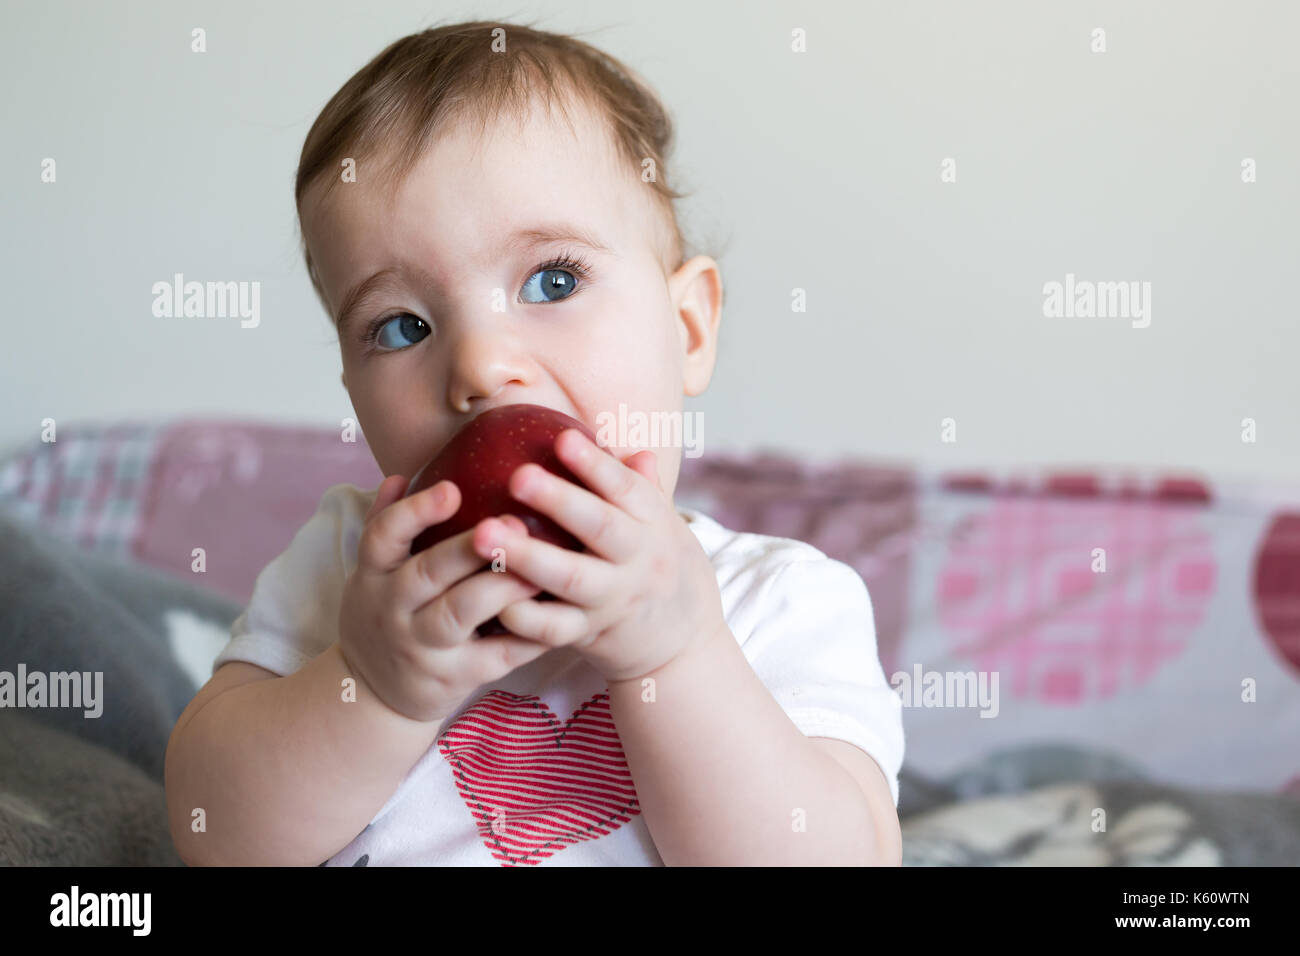 Small child eats a red apple at home closeup. Stock Photo